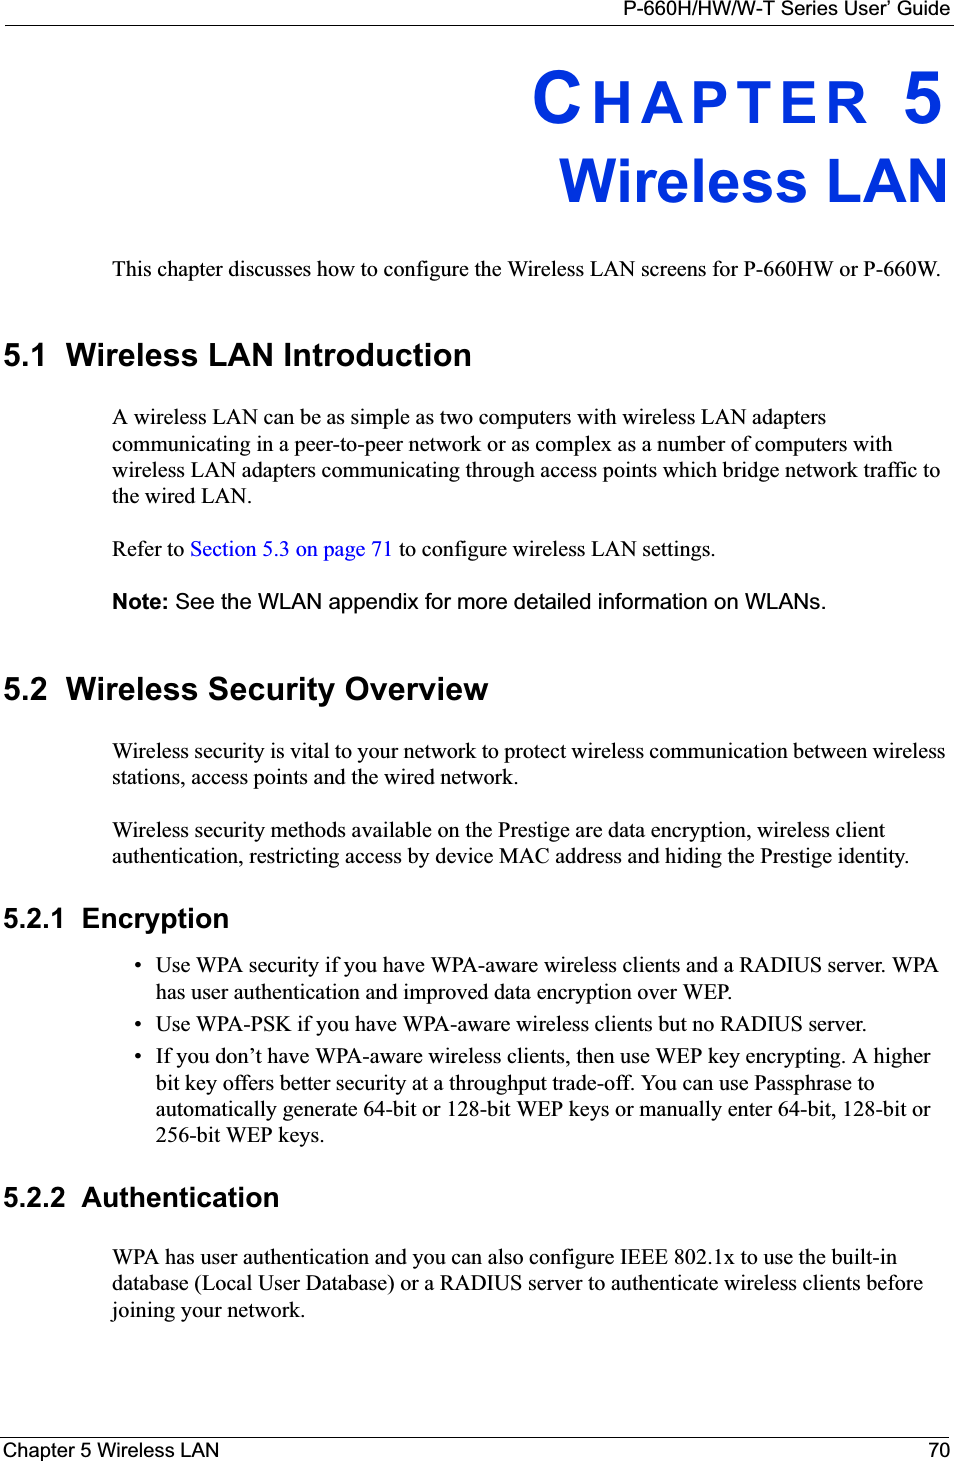 P-660H/HW/W-T Series User’ GuideChapter 5 Wireless LAN 70CHAPTER 5Wireless LANThis chapter discusses how to configure the Wireless LAN screens for P-660HW or P-660W.5.1  Wireless LAN Introduction A wireless LAN can be as simple as two computers with wireless LAN adapters communicating in a peer-to-peer network or as complex as a number of computers with wireless LAN adapters communicating through access points which bridge network traffic to the wired LAN. Refer to Section 5.3 on page 71 to configure wireless LAN settings. Note: See the WLAN appendix for more detailed information on WLANs.5.2  Wireless Security Overview Wireless security is vital to your network to protect wireless communication between wireless stations, access points and the wired network.Wireless security methods available on the Prestige are data encryption, wireless client authentication, restricting access by device MAC address and hiding the Prestige identity.5.2.1  Encryption• Use WPA security if you have WPA-aware wireless clients and a RADIUS server. WPA has user authentication and improved data encryption over WEP.• Use WPA-PSK if you have WPA-aware wireless clients but no RADIUS server.• If you don’t have WPA-aware wireless clients, then use WEP key encrypting. A higher bit key offers better security at a throughput trade-off. You can use Passphrase to automatically generate 64-bit or 128-bit WEP keys or manually enter 64-bit, 128-bit or 256-bit WEP keys.5.2.2  AuthenticationWPA has user authentication and you can also configure IEEE 802.1x to use the built-in database (Local User Database) or a RADIUS server to authenticate wireless clients before joining your network. 